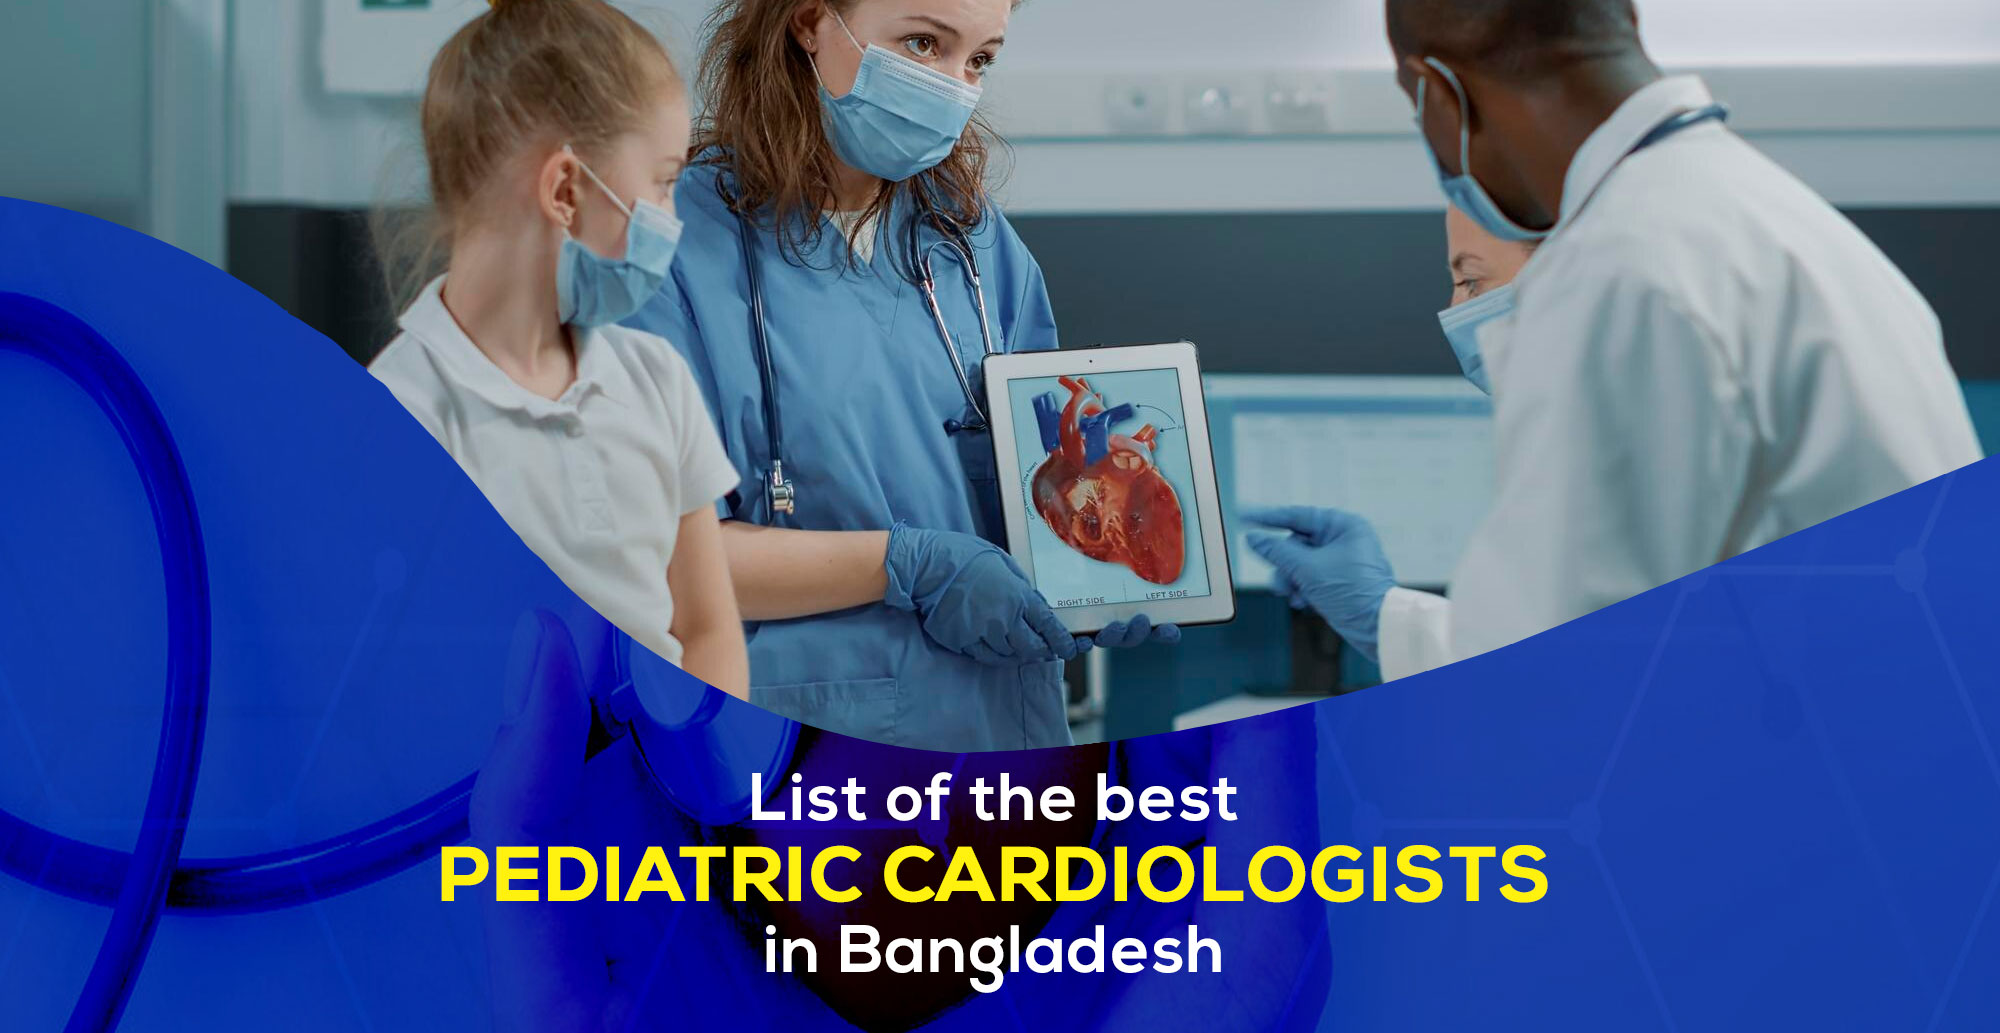 List of Best Pediatric Cardiologists in Bangladesh